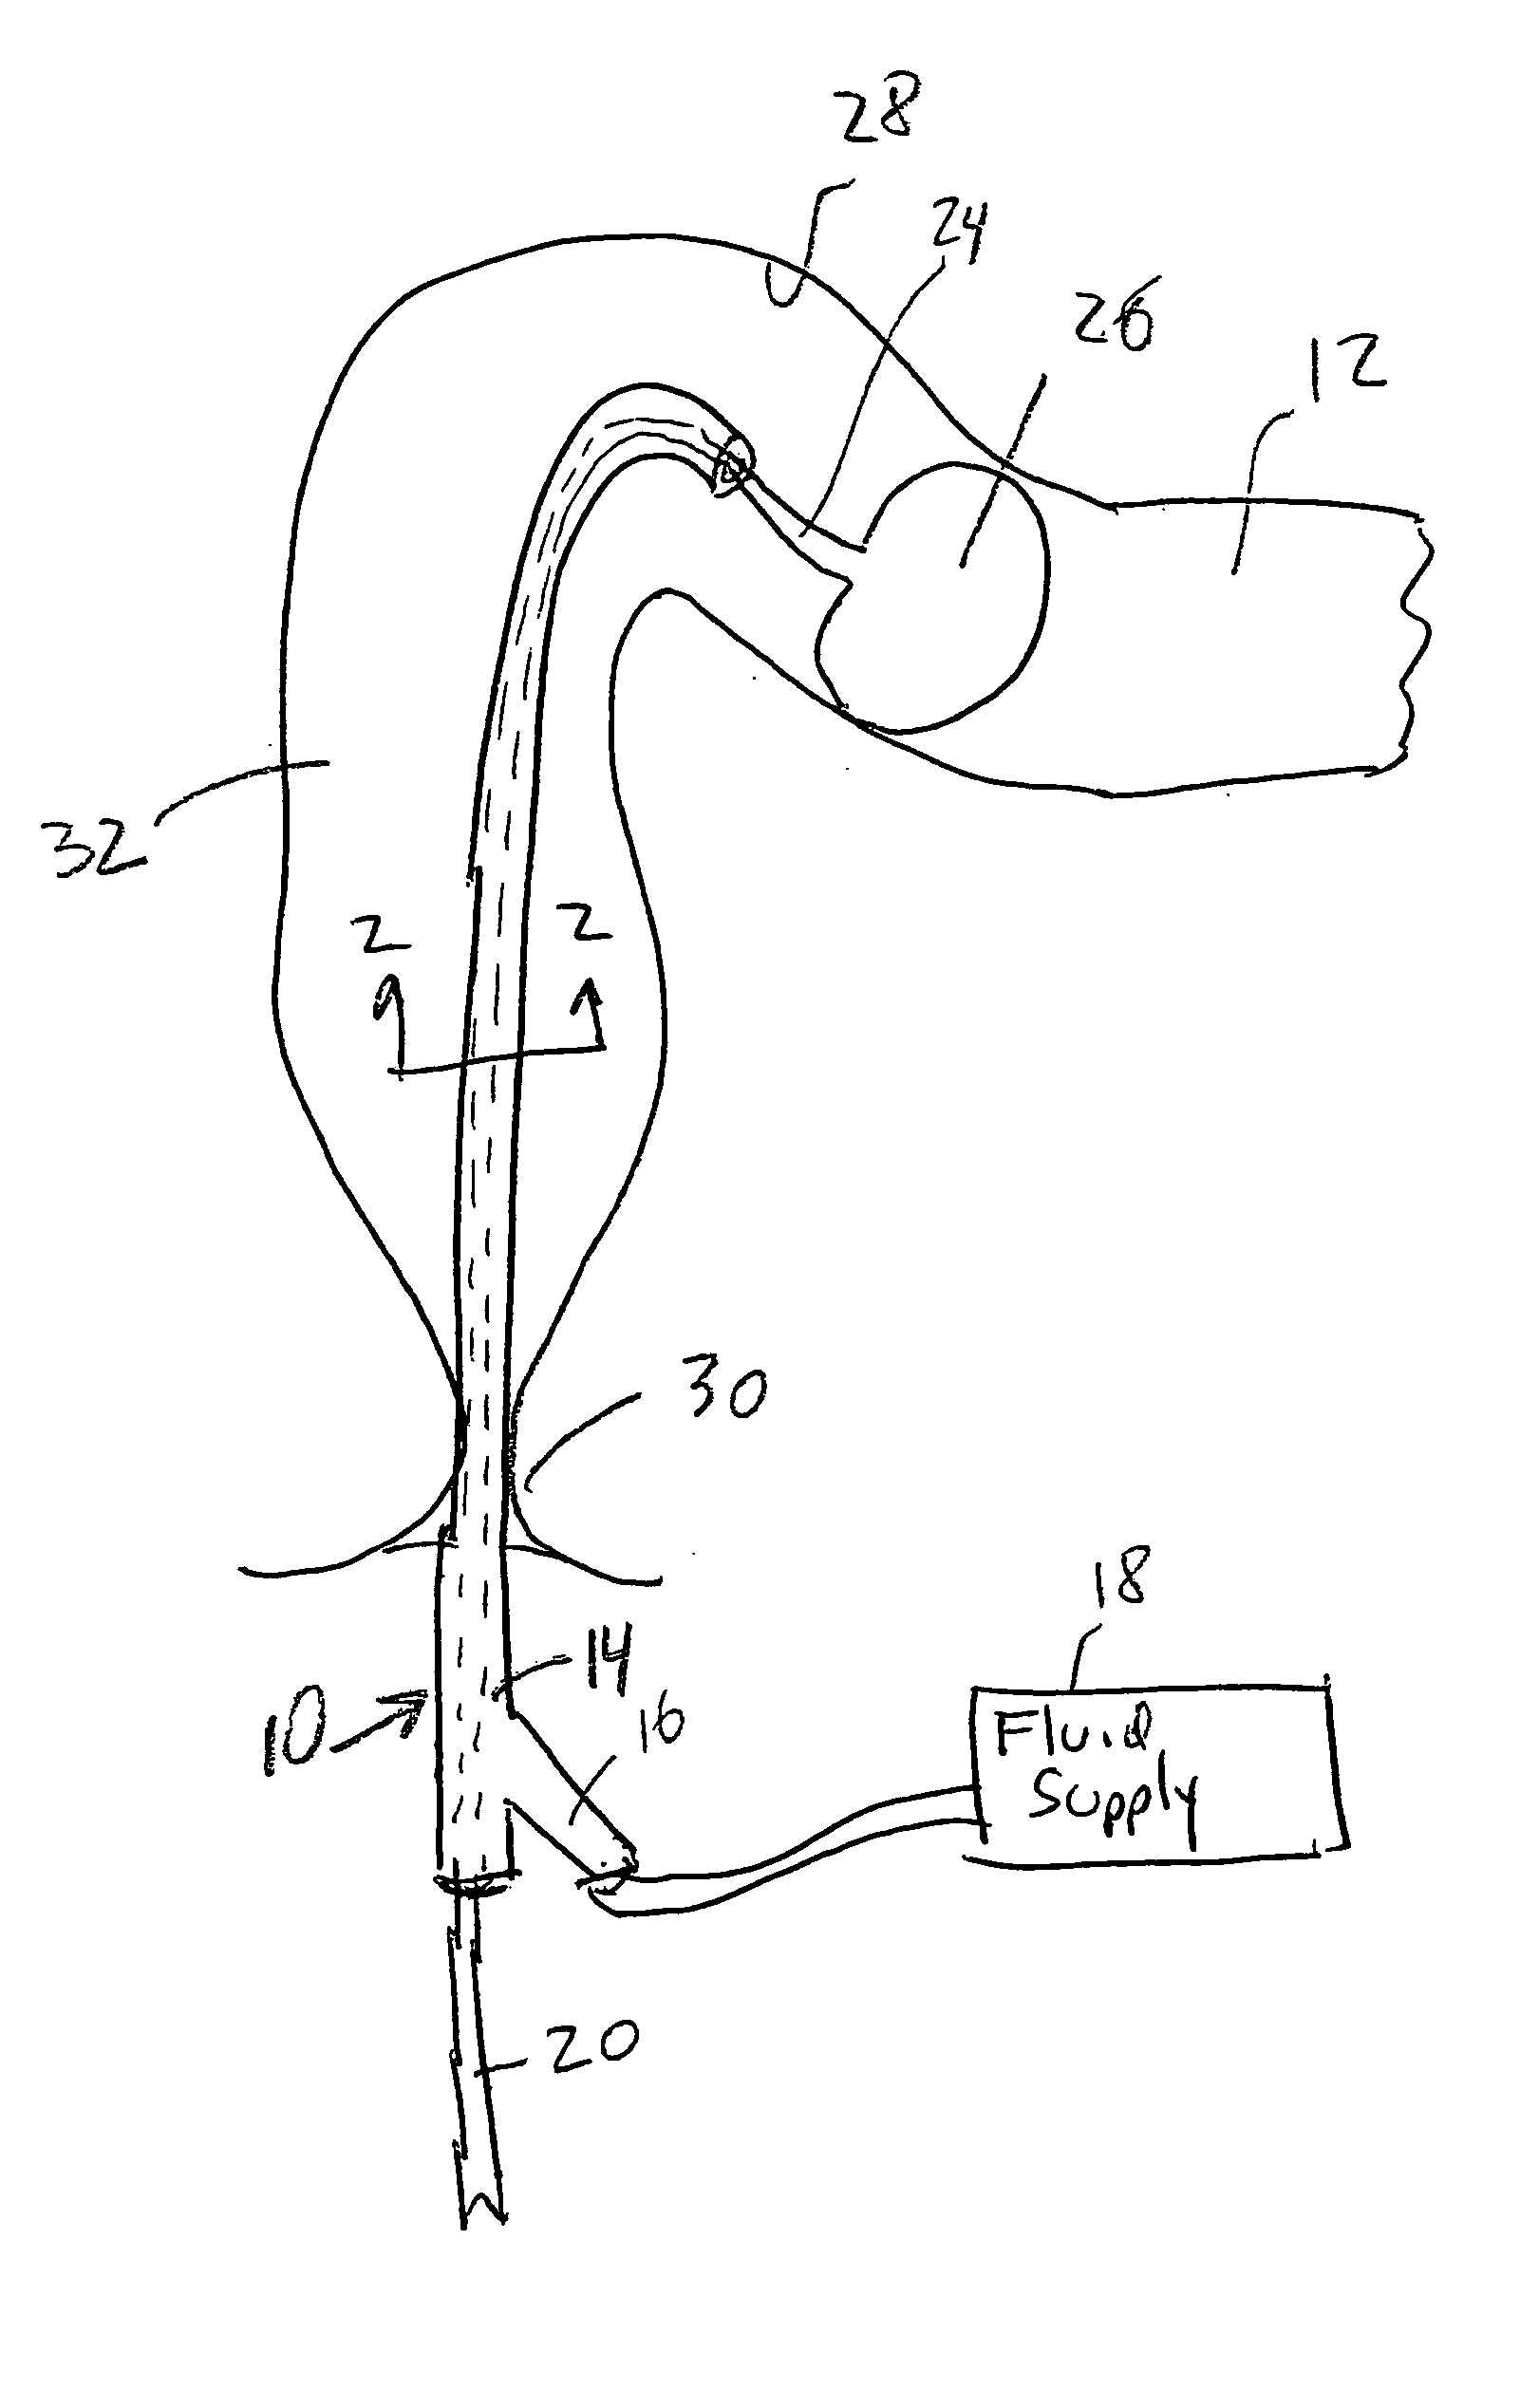 Guidewire for use in colonic irrigation